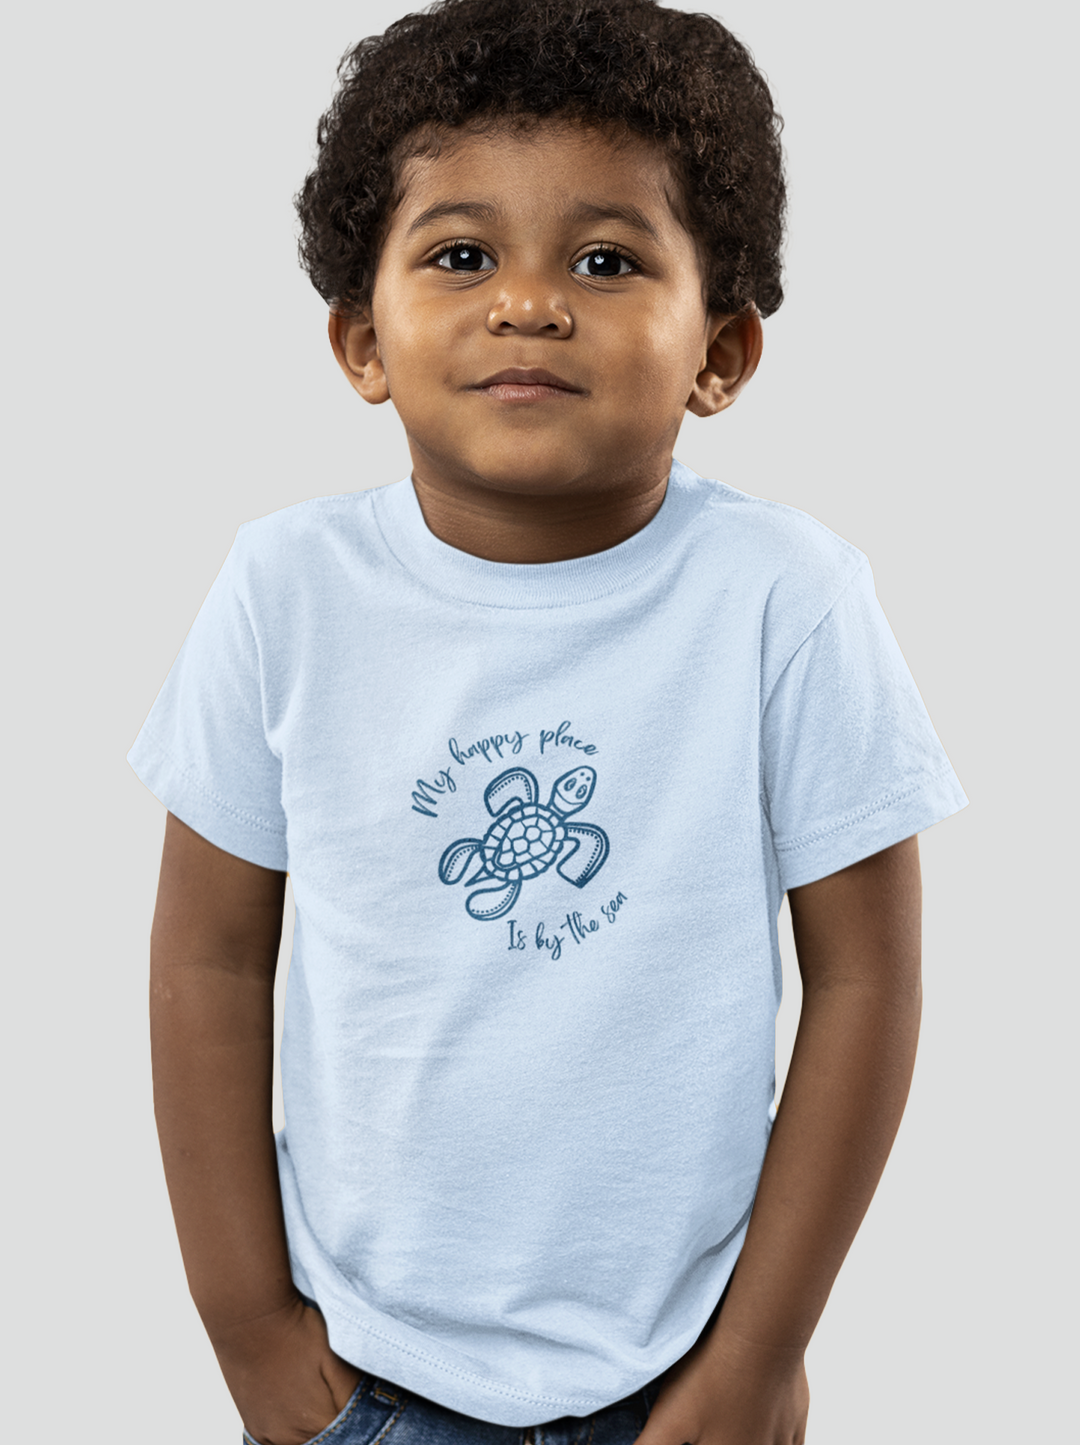 By The Sea  - Kid's Cotton Tee